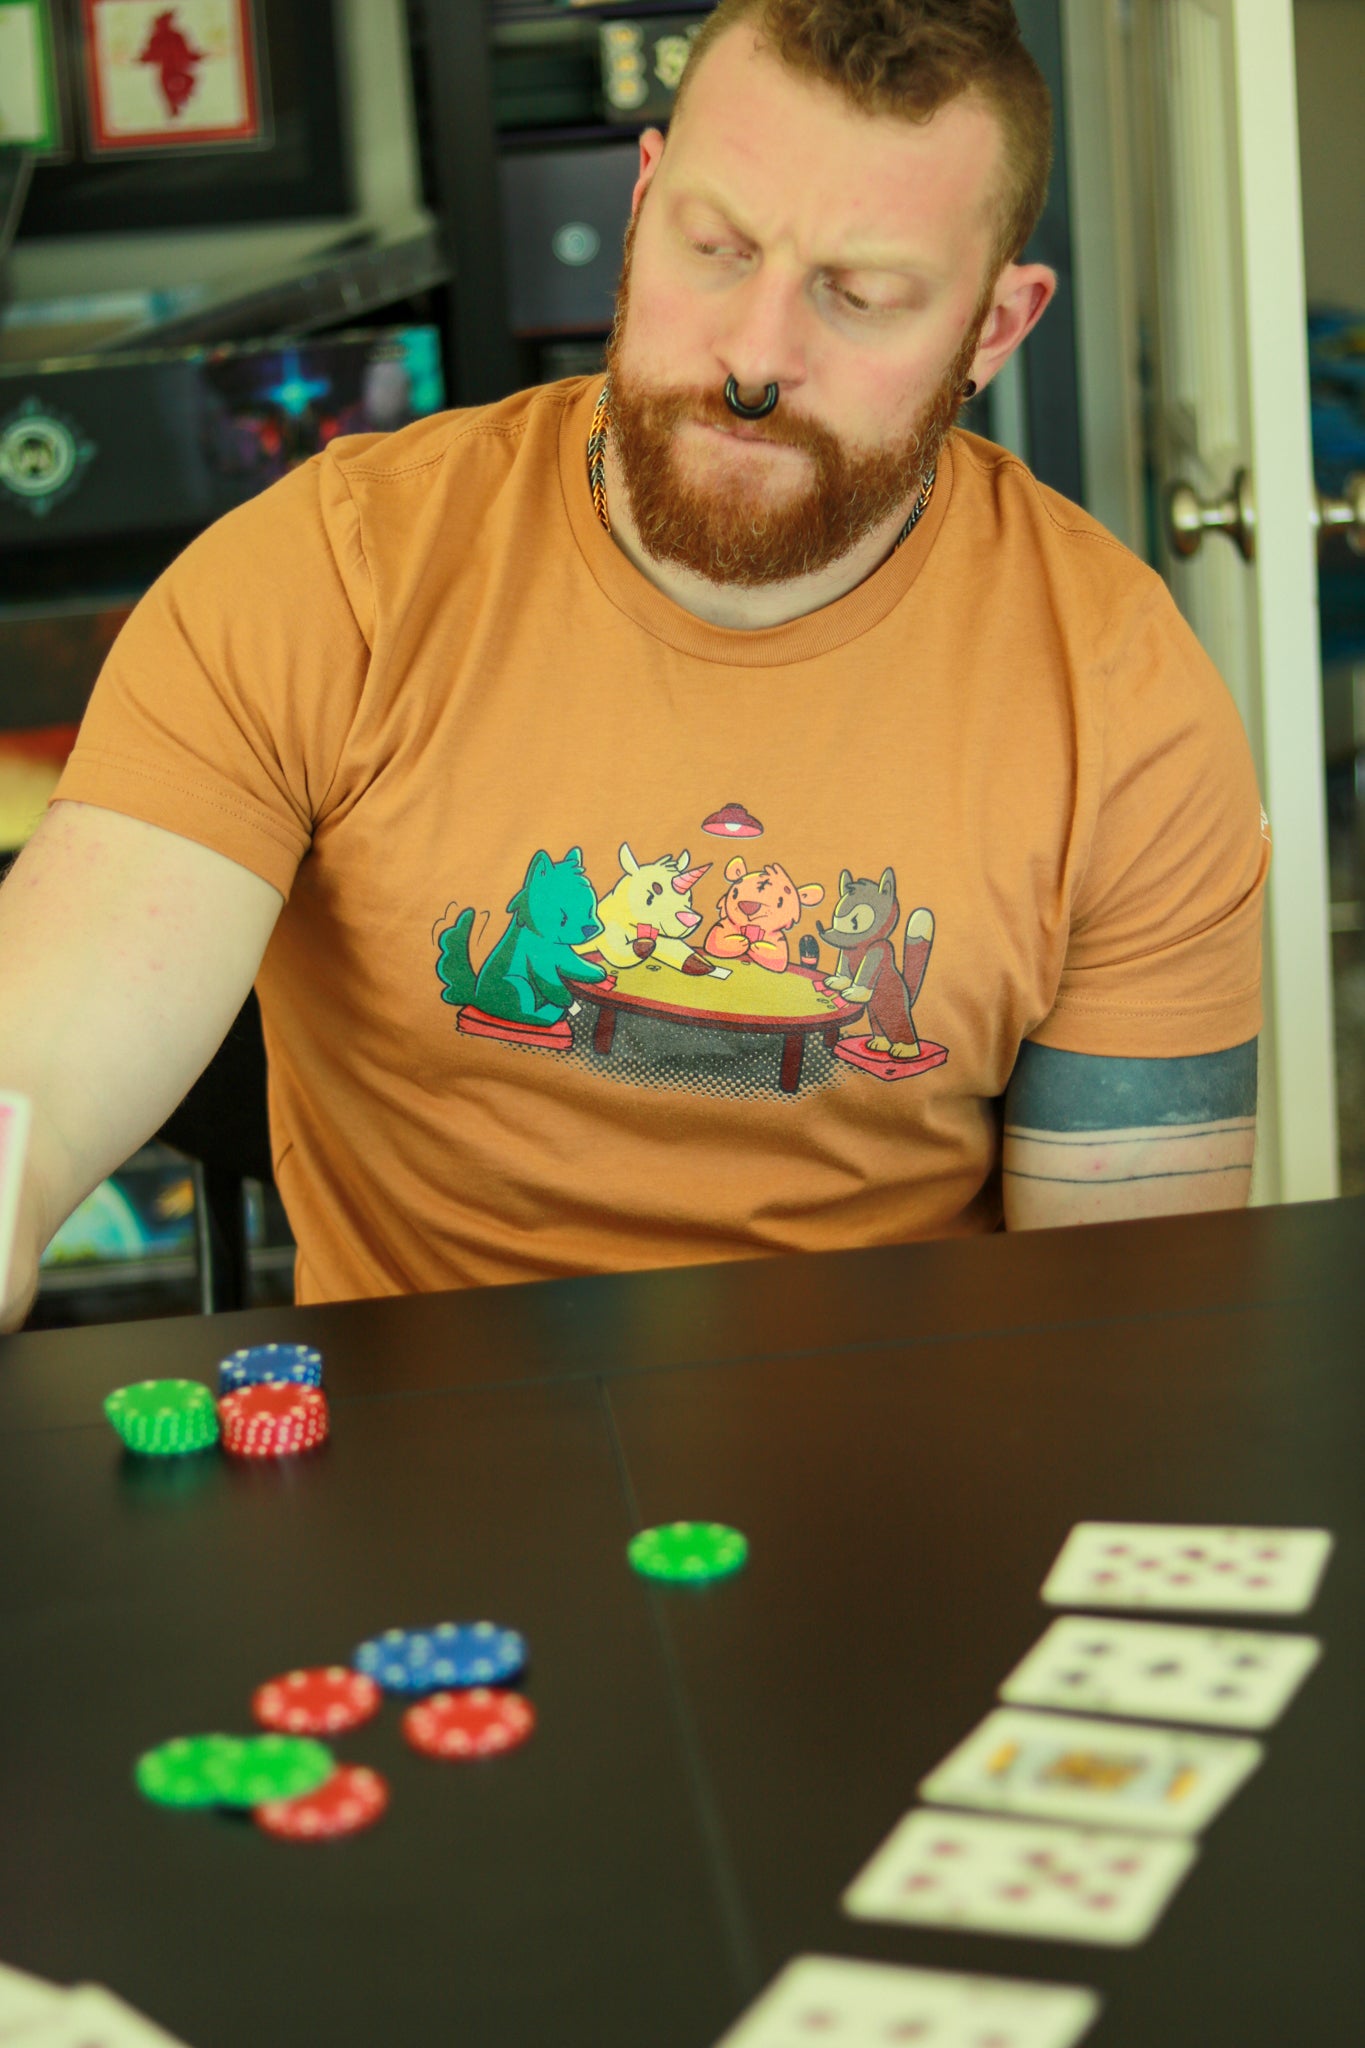 Dusty Orange t-shirt featuring 4 animals, a wolf, a unicorn, a tiger, and a racoon, playing cards around a table, worn by bearded ginger with mohawk and tattoos playing cards.